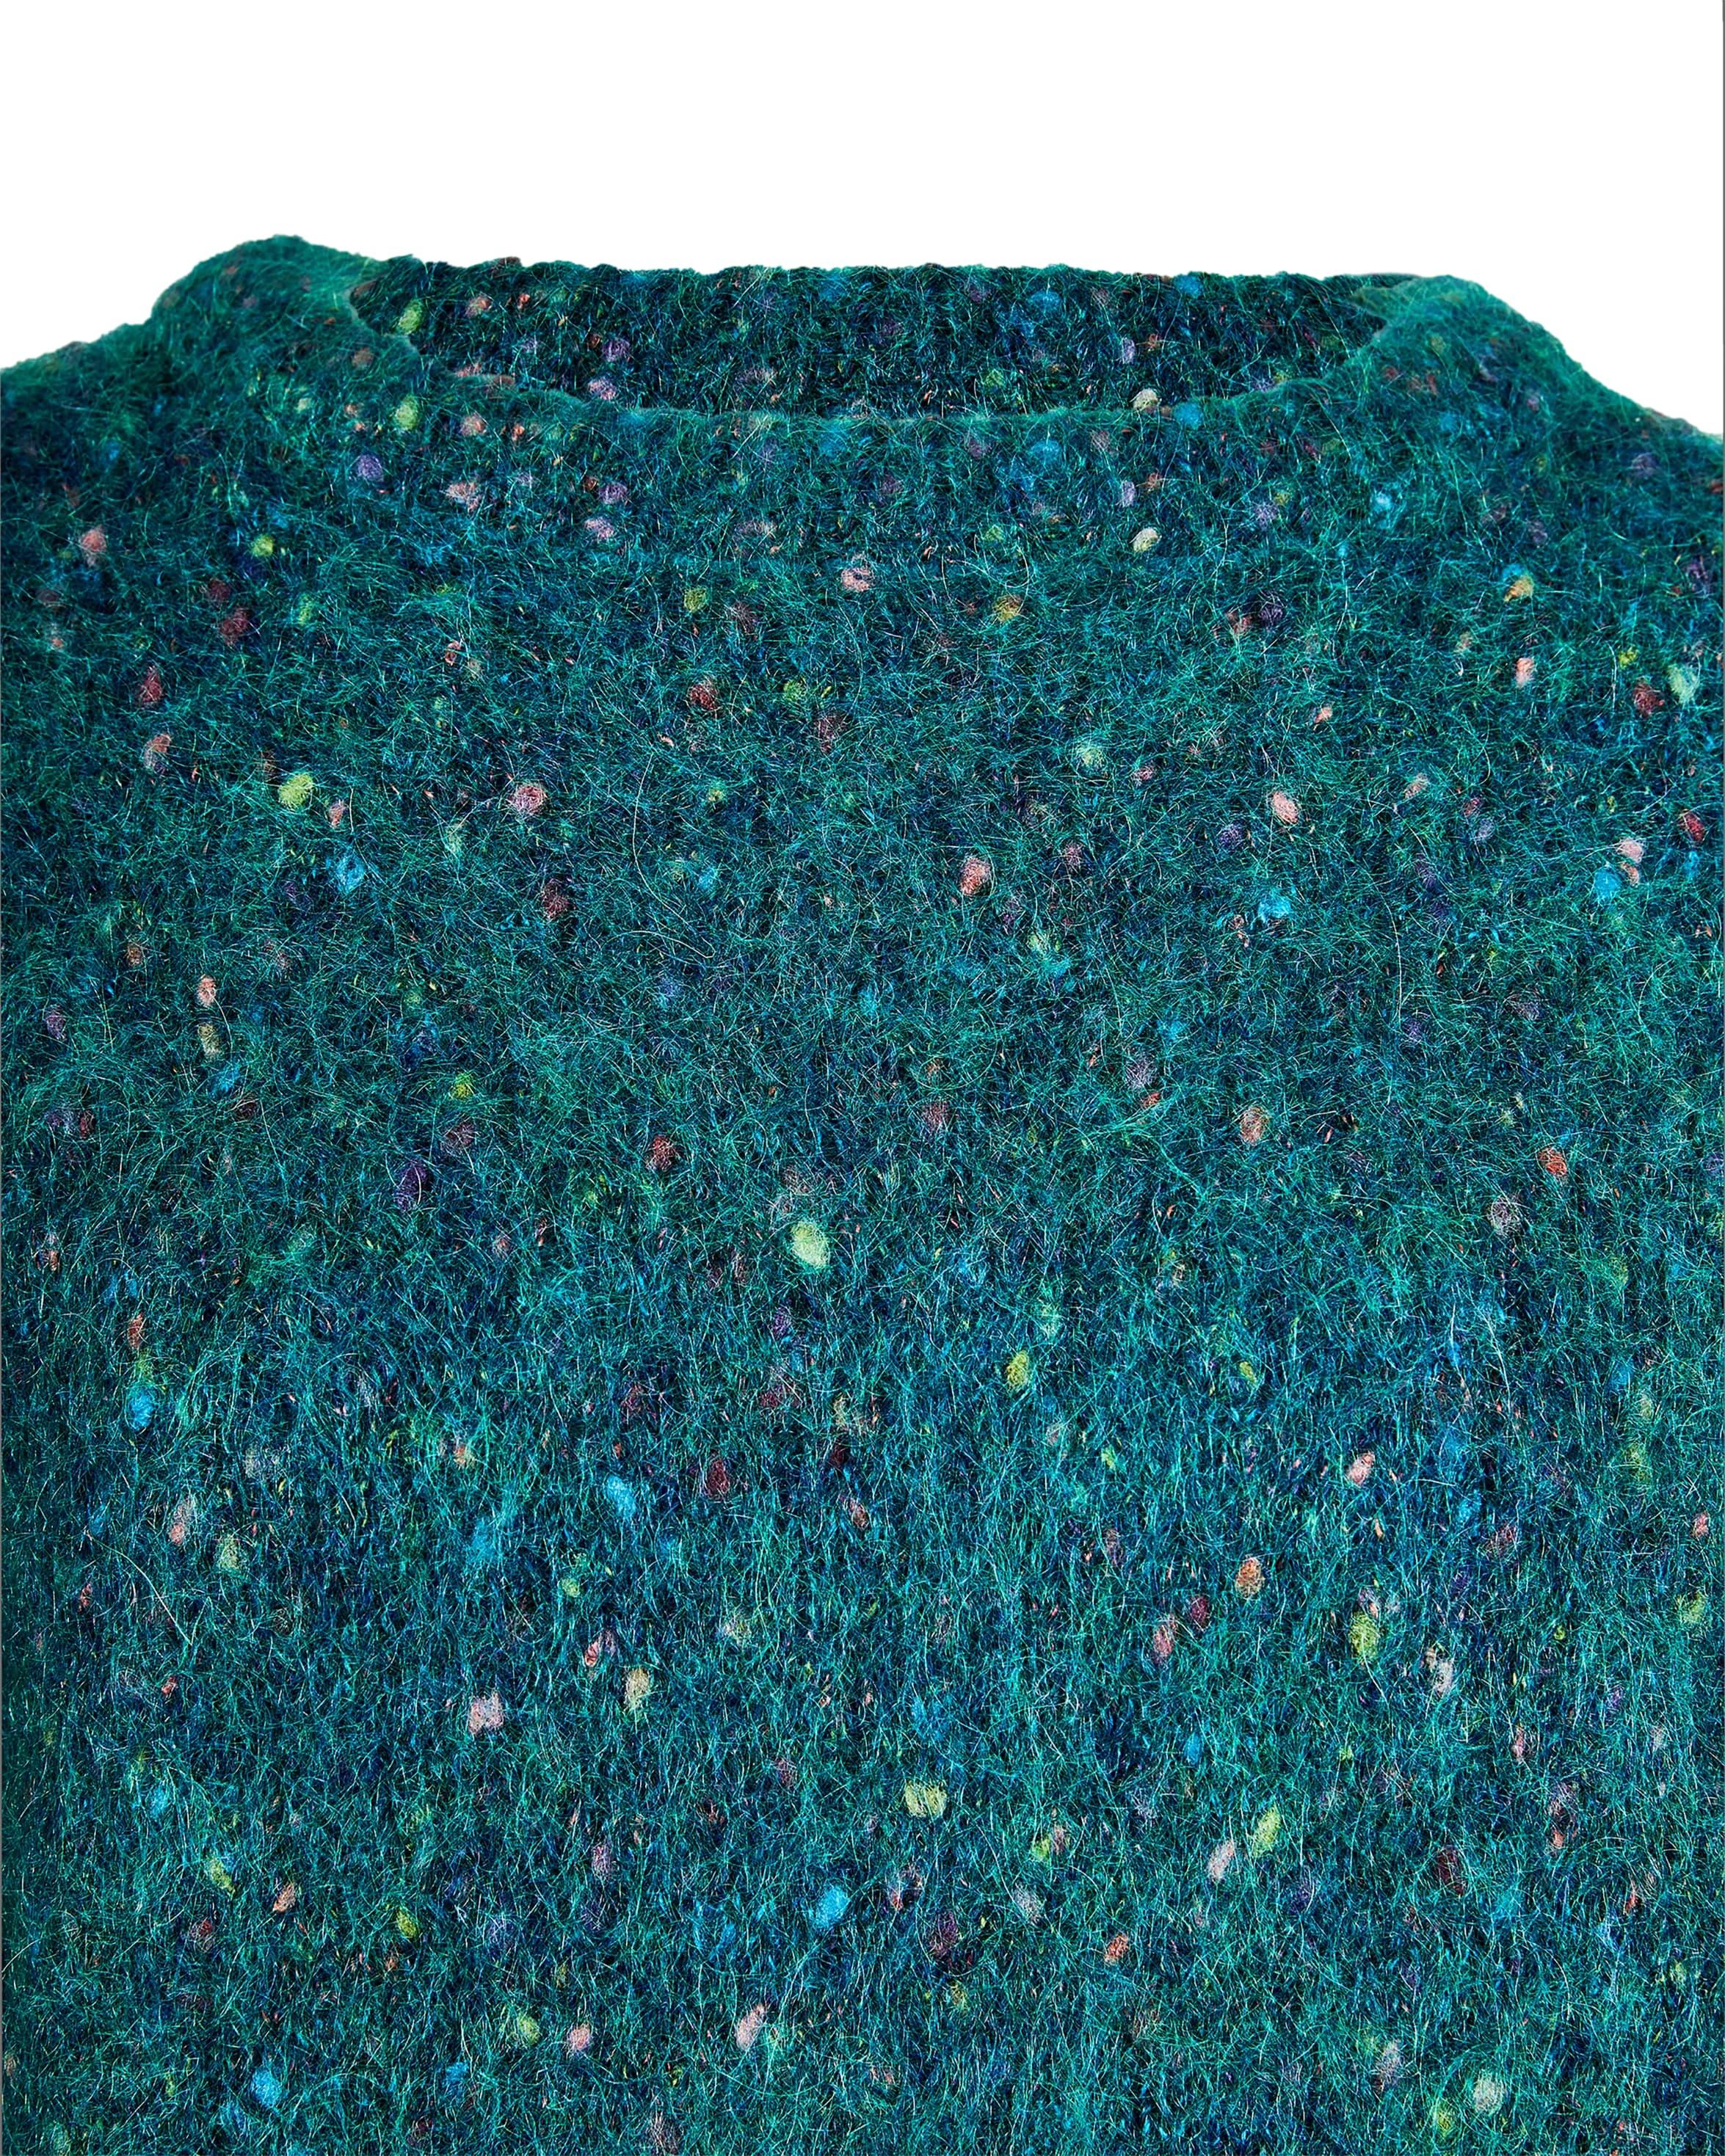 Women's 1980s Special Vintage Turquoise Knit Crew Neck Sweater